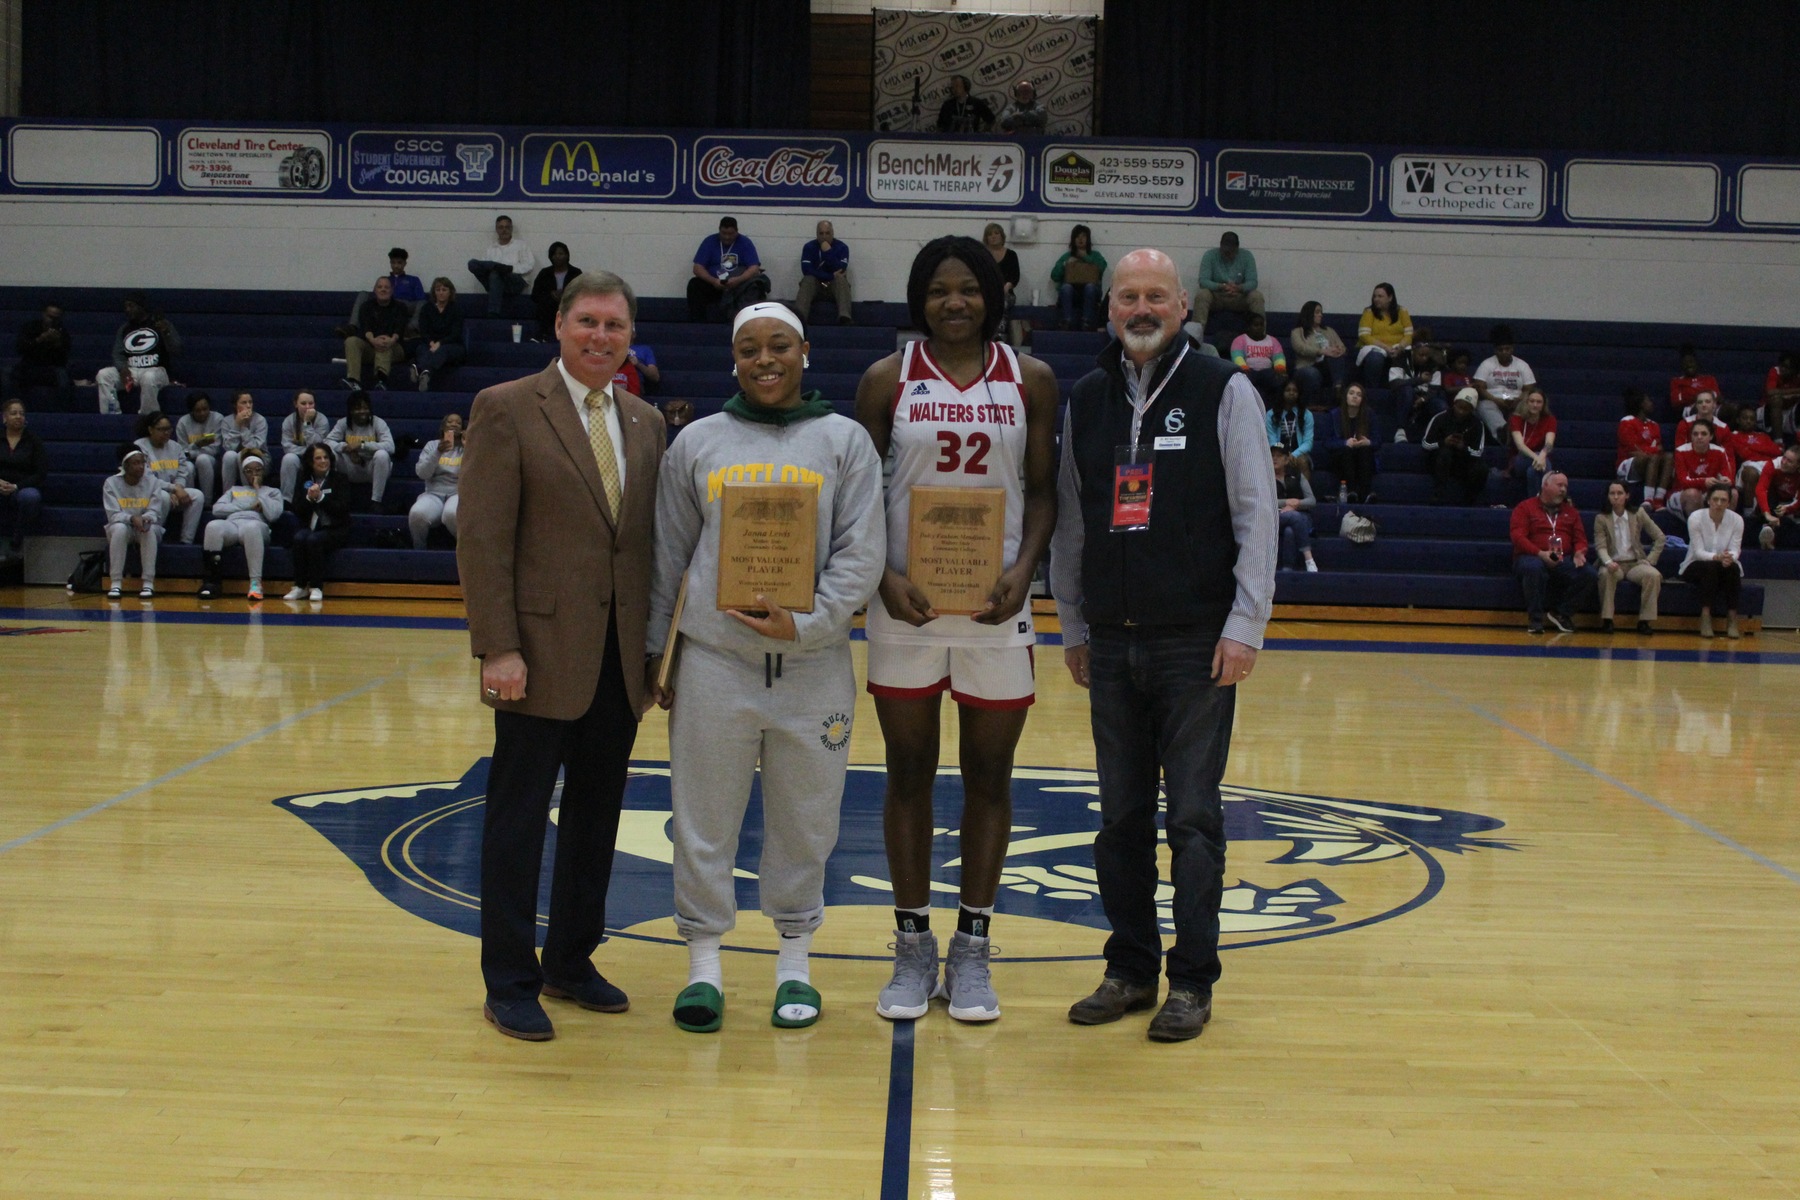 Janna Lewis (L) and Dulcy Fankam Mendjiadeu (R) are congratulated by Dr. Foster Chason, TCCAA Commissioner and Dr. Bill Seymour, TCCAA President, during Saturday's ceremony (courtesy of cscougars.com)